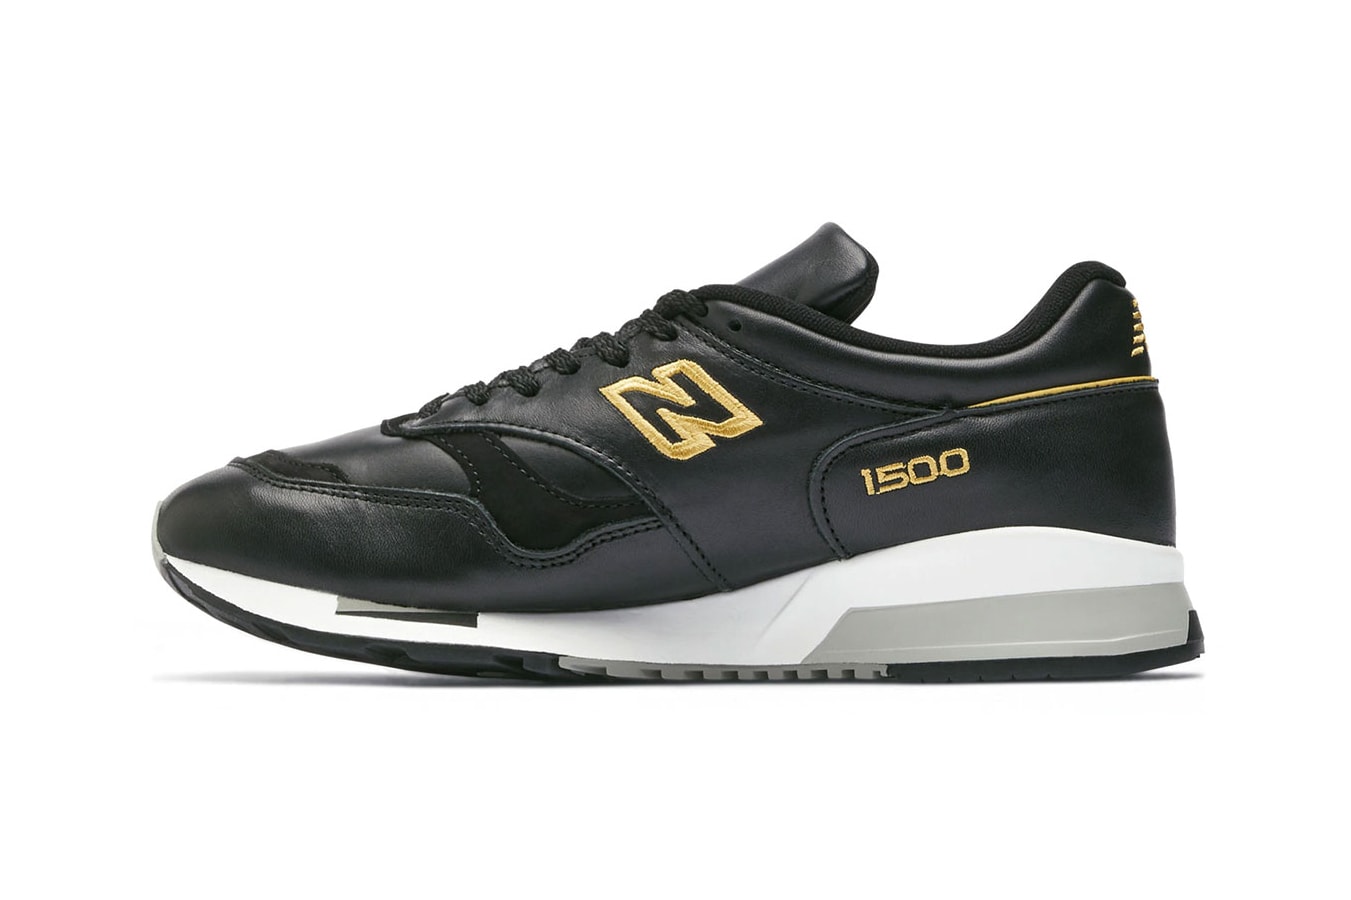 New Balance Made in UK 1500 Liverpool FC black and gold limited edition six times collection 